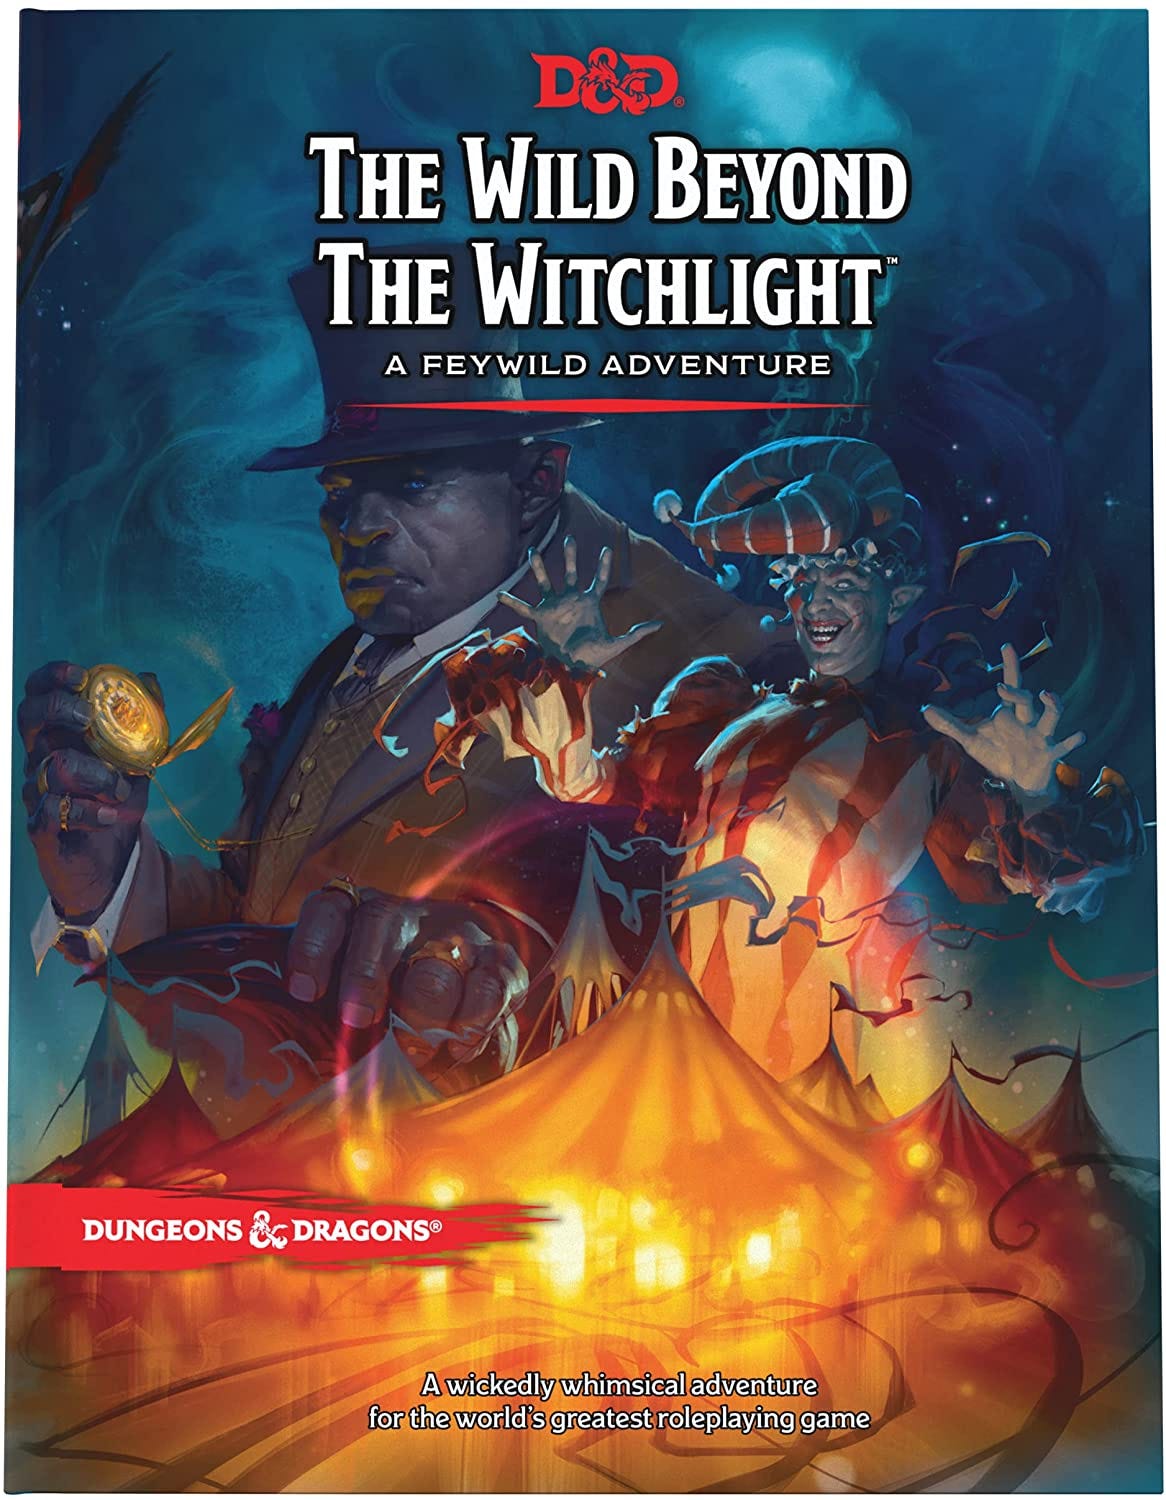 THE WILD BEYOND THE WITCHLIGHT Adventure By Wizards RPG Team ebook Download